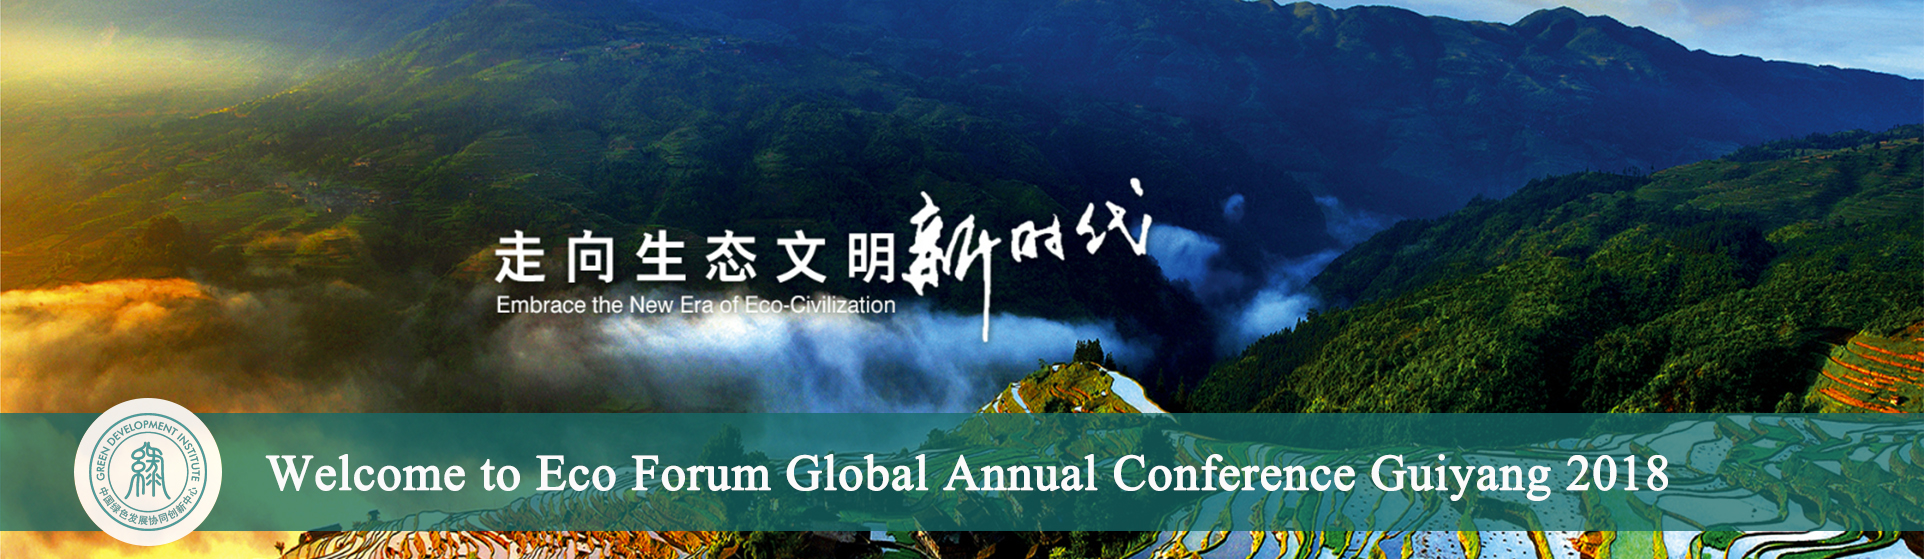 Welcome to Eco Forum Global Annual Conference Guiyang 2018